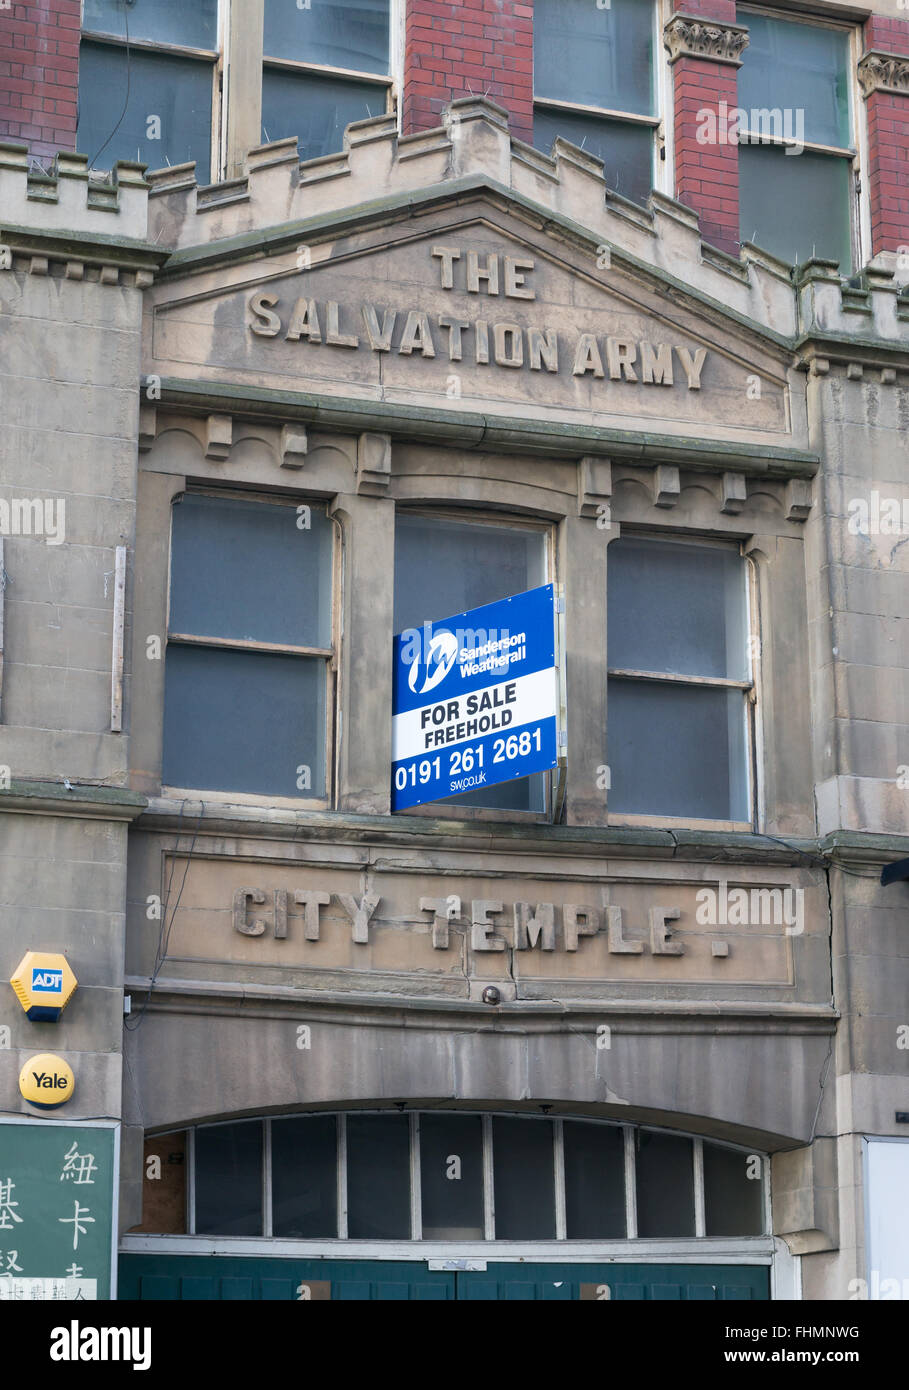 The old City Temple of the Salvation army in Newcastle upon Tyne, up for sale. North East England, UK Stock Photo